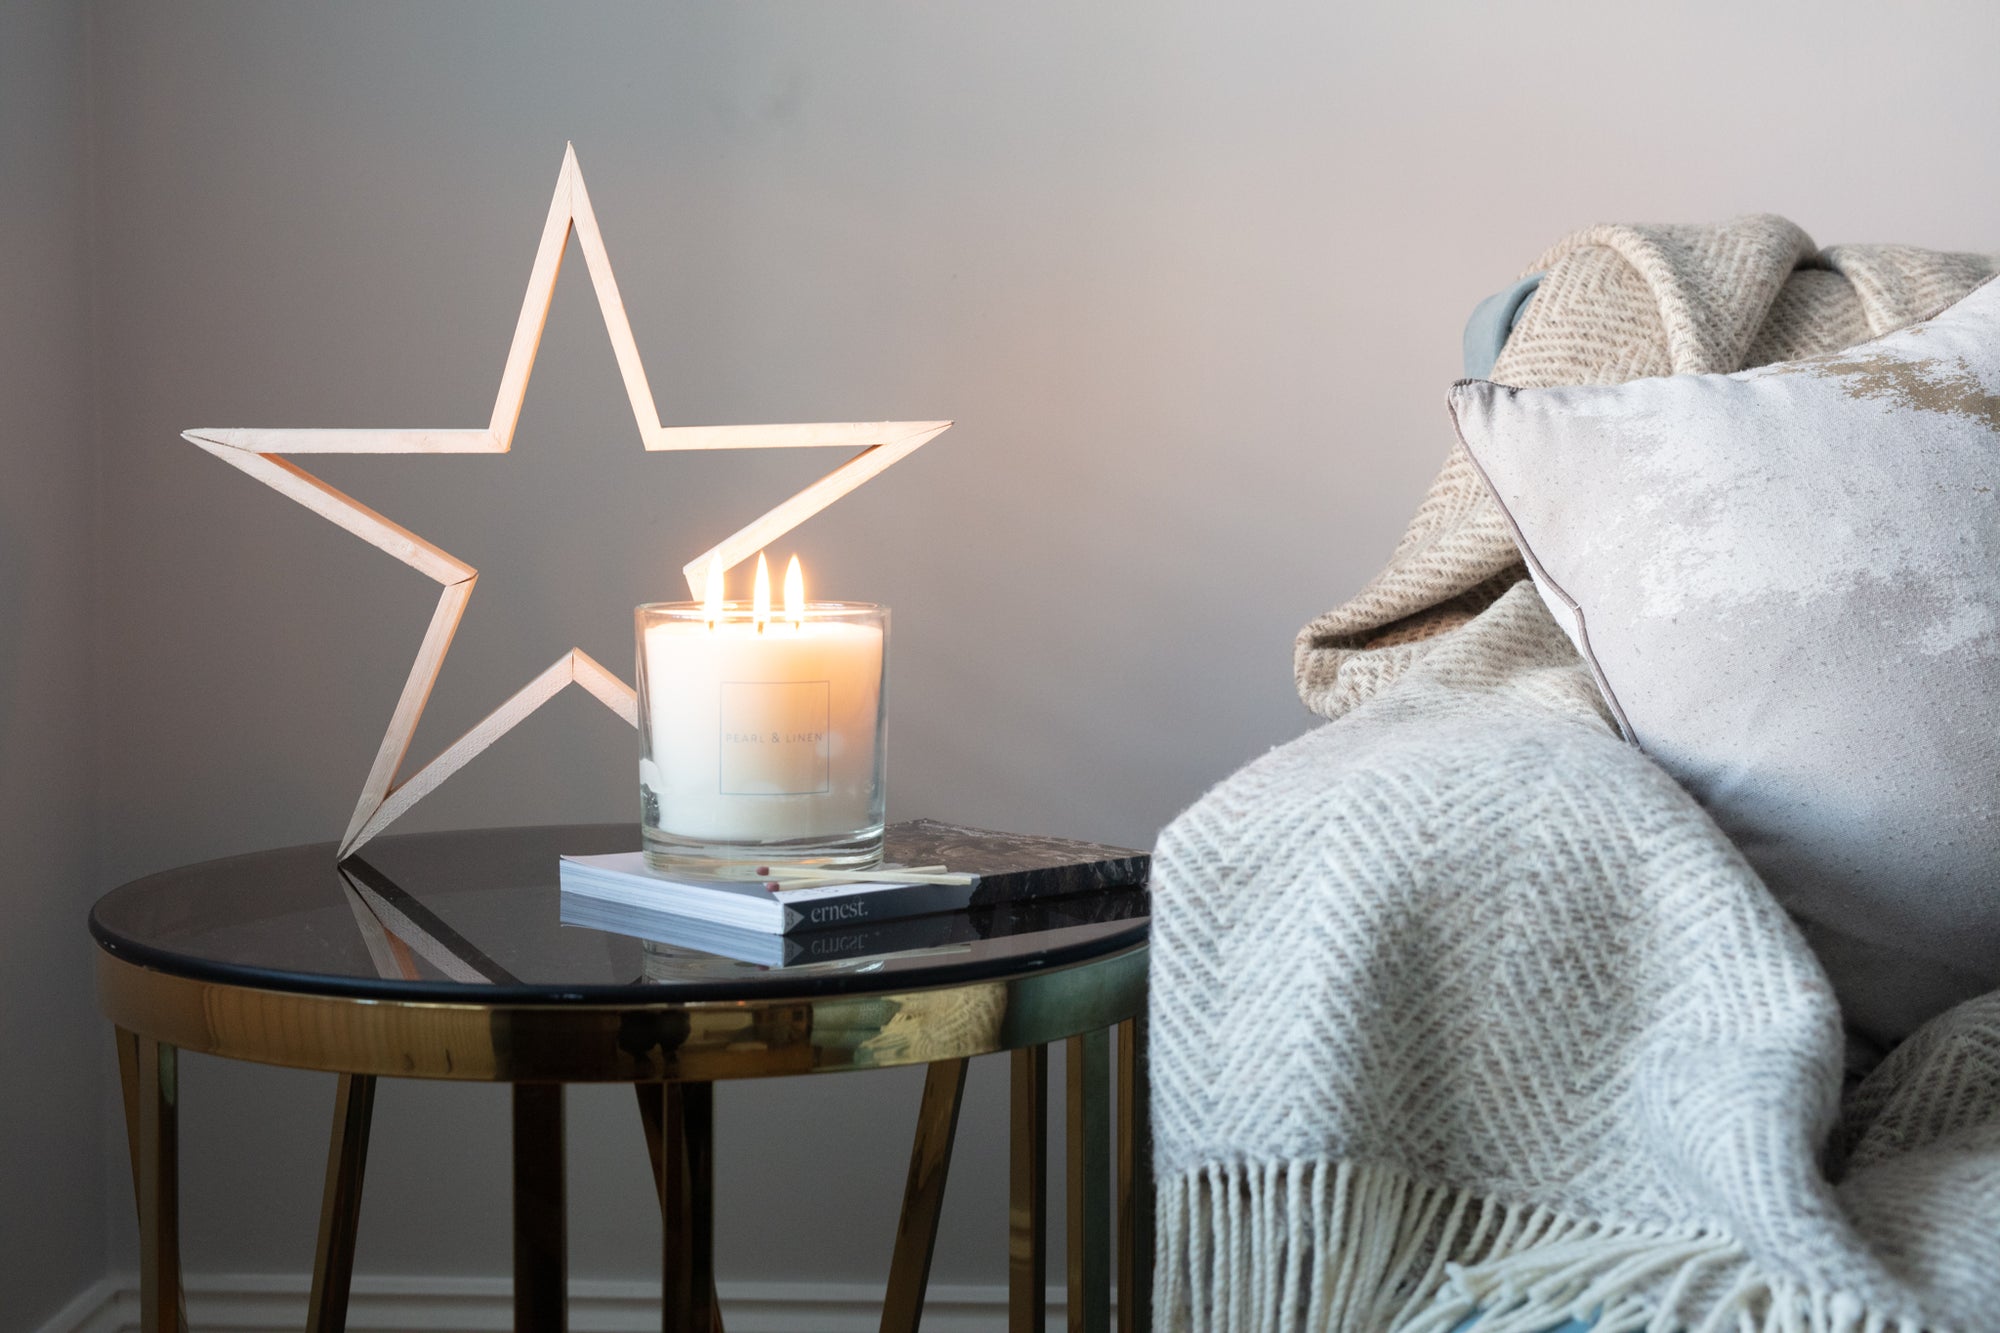 It’s time to ‘glow up’ your home this Autumn and create a cosy sanctuary